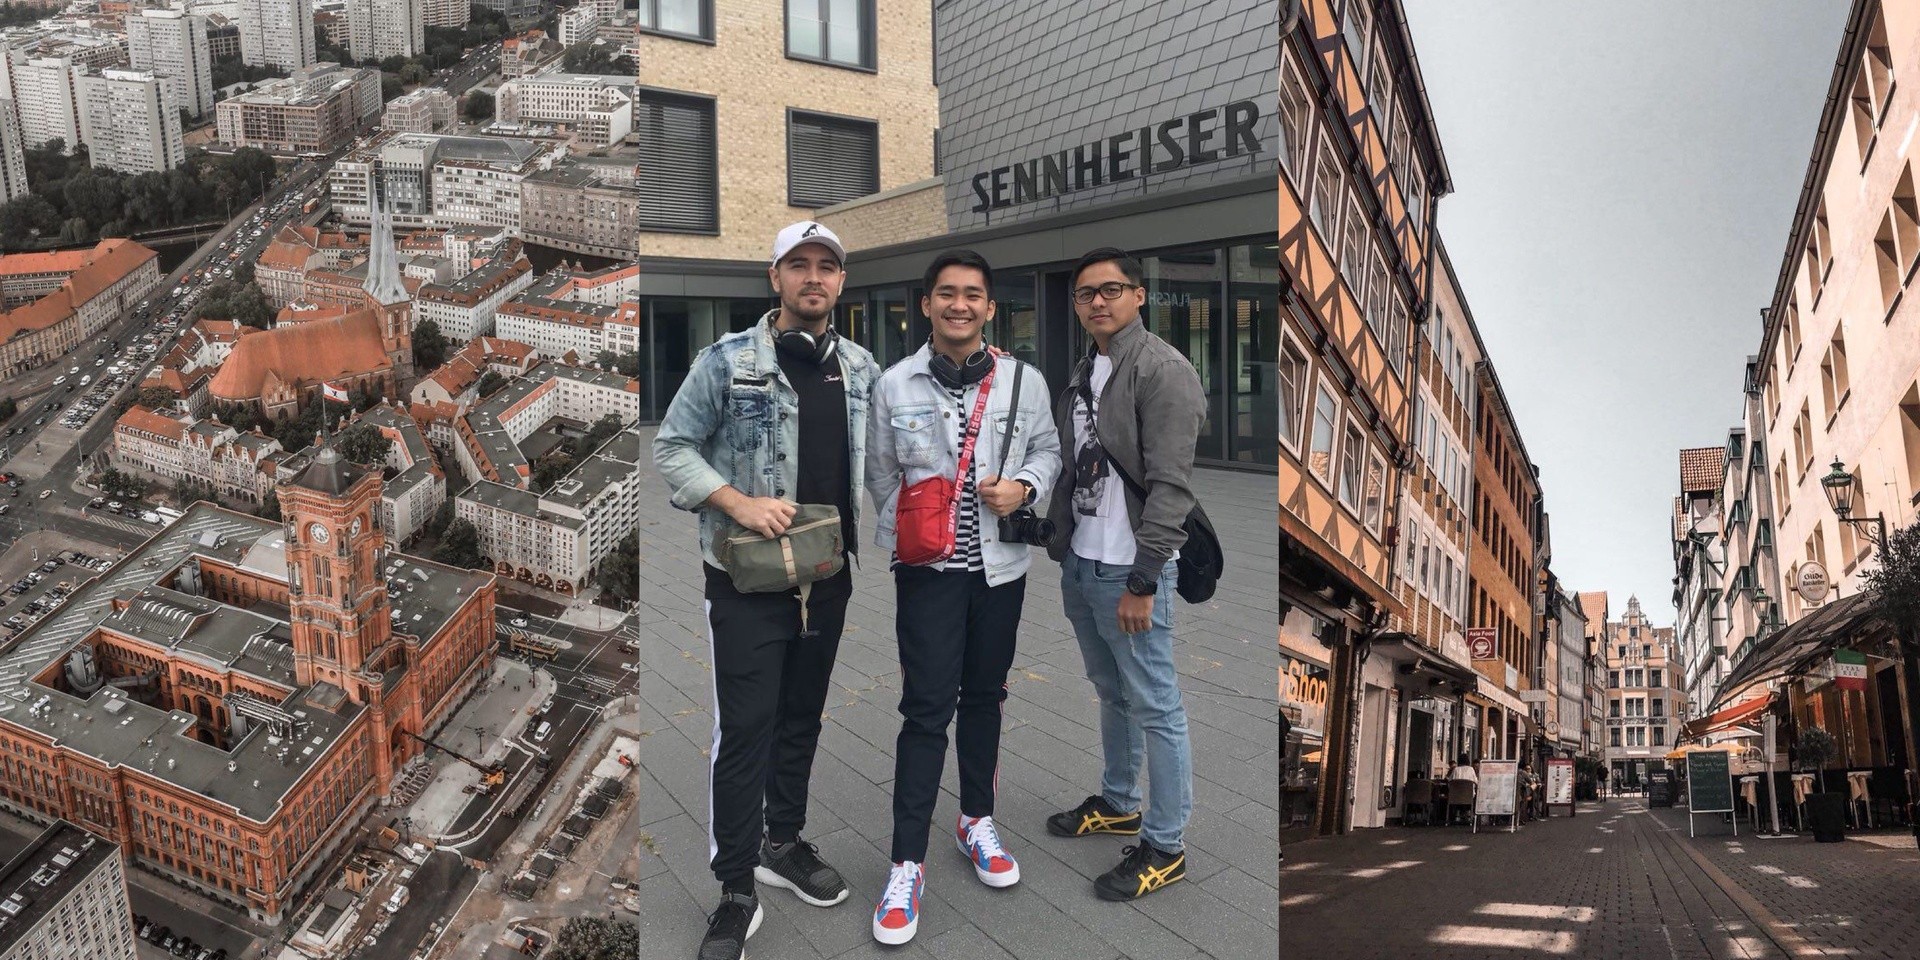 Sennheiser Sound Heroes take us through the sights and sounds of Germany